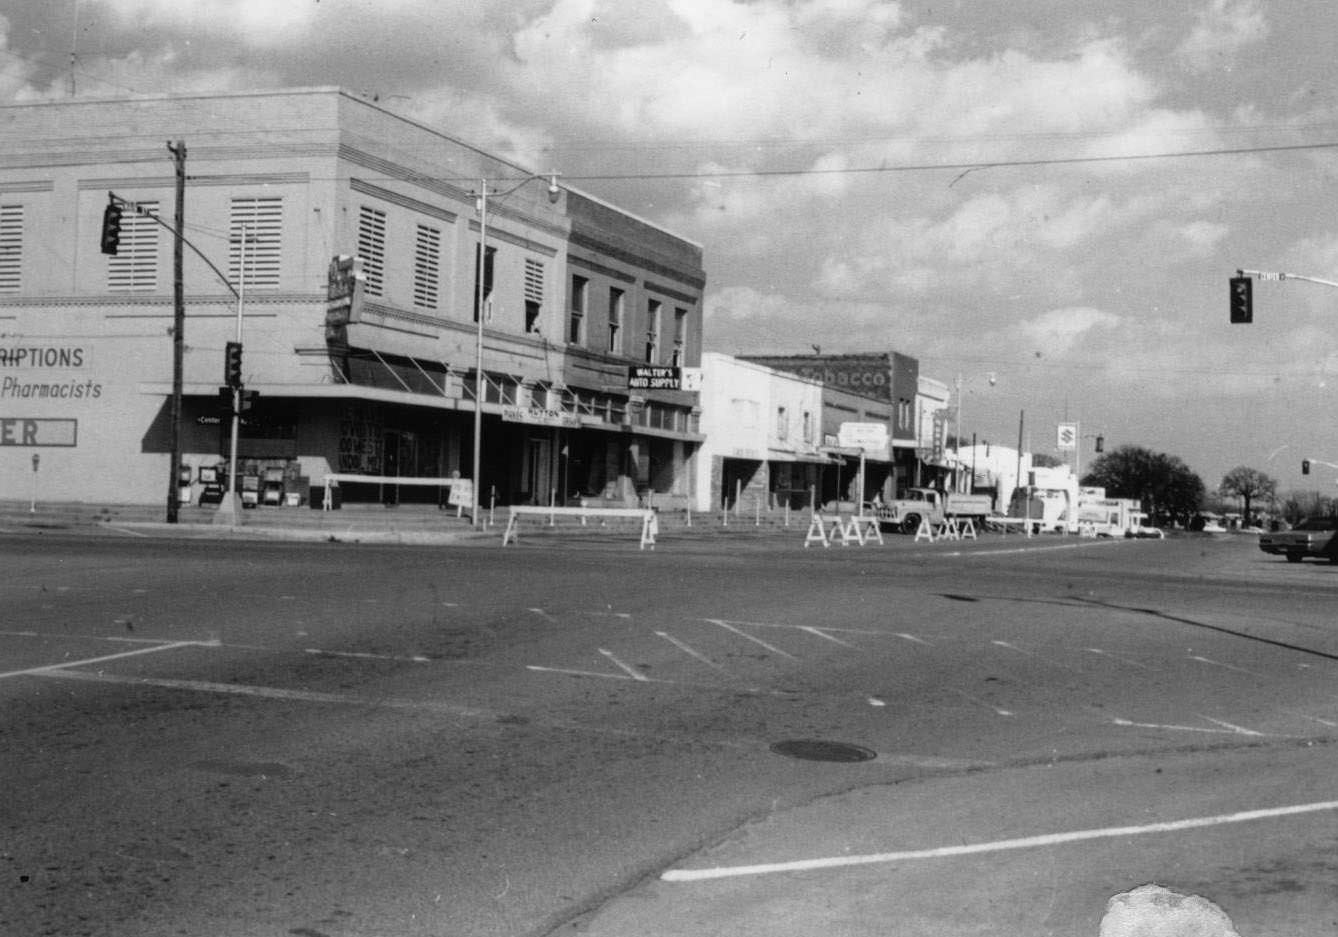 Downtown Arlington being prepared for a demolition in 1972.